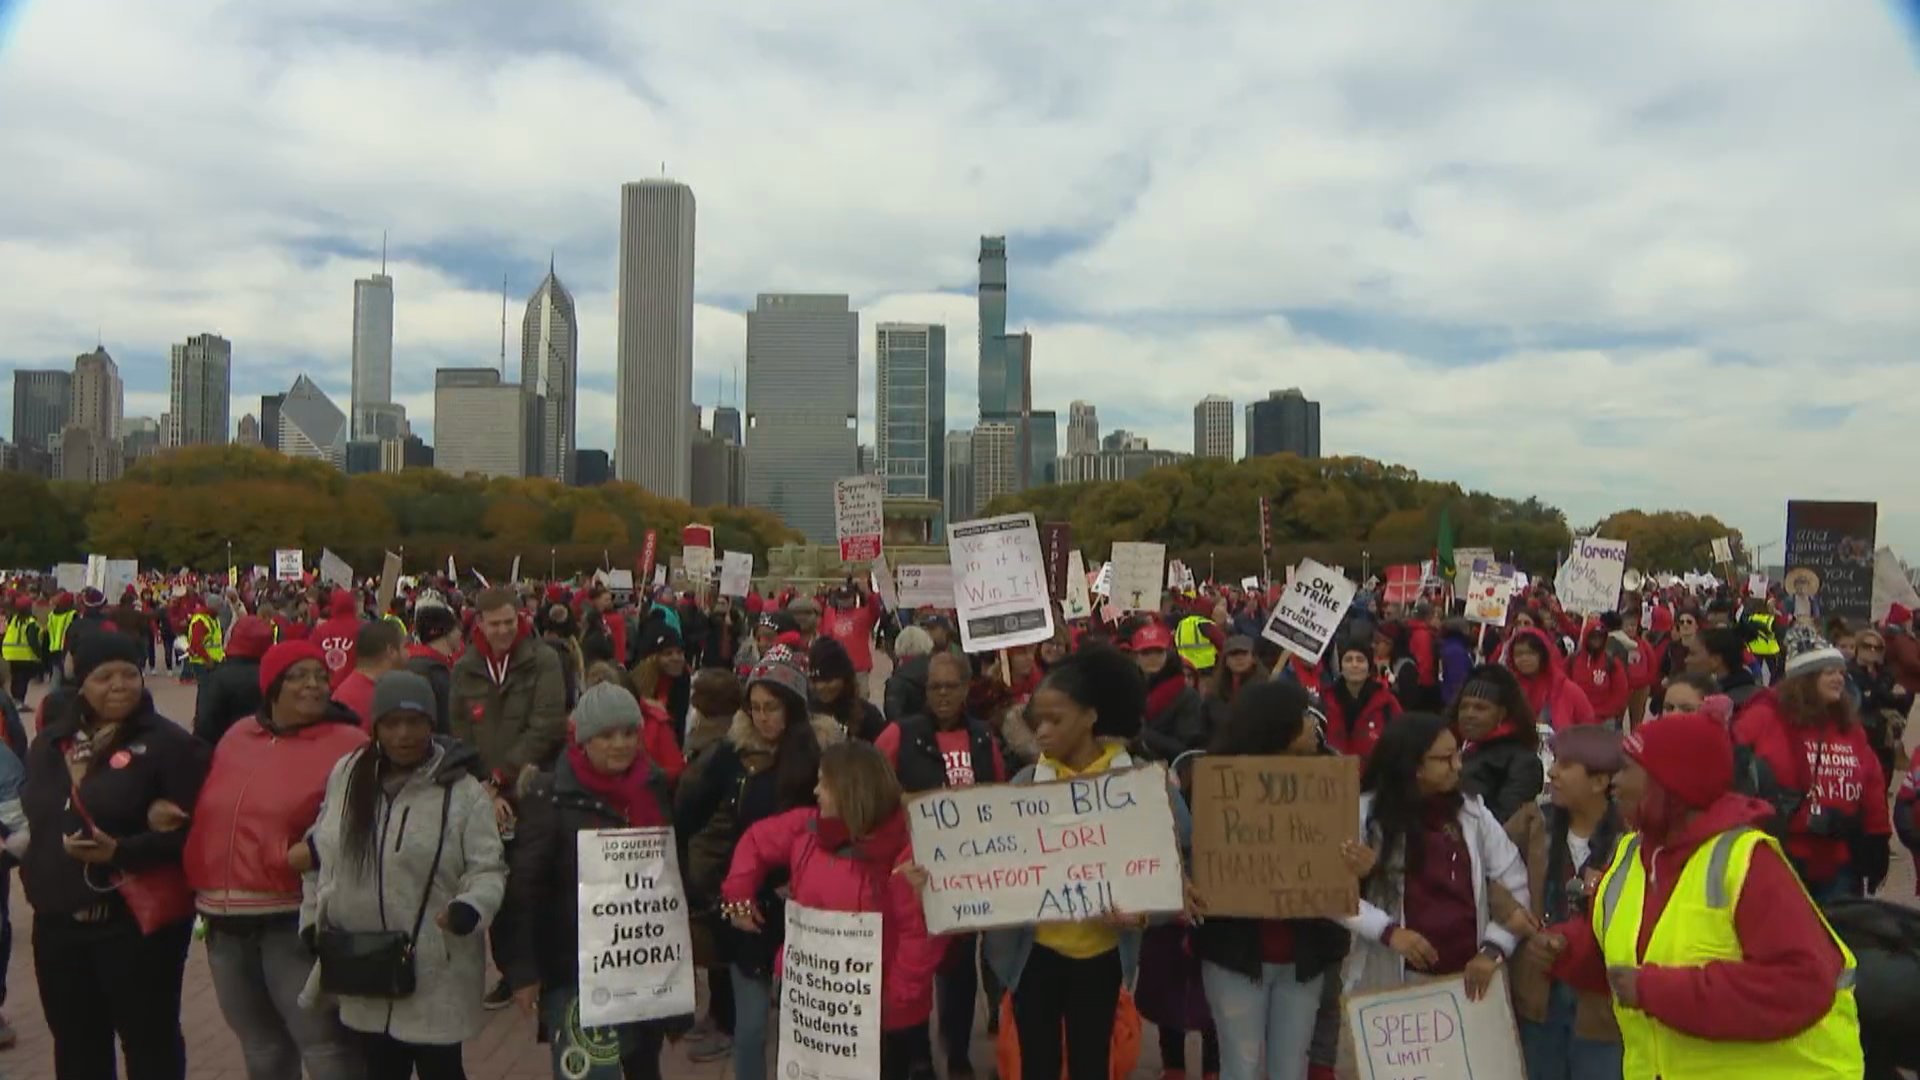 Members of the Chicago Teachers Union gathered for a rally at Buckingham Fountain on Friday afternoon, the seventh day of their ongoing strike. (WTTW News)